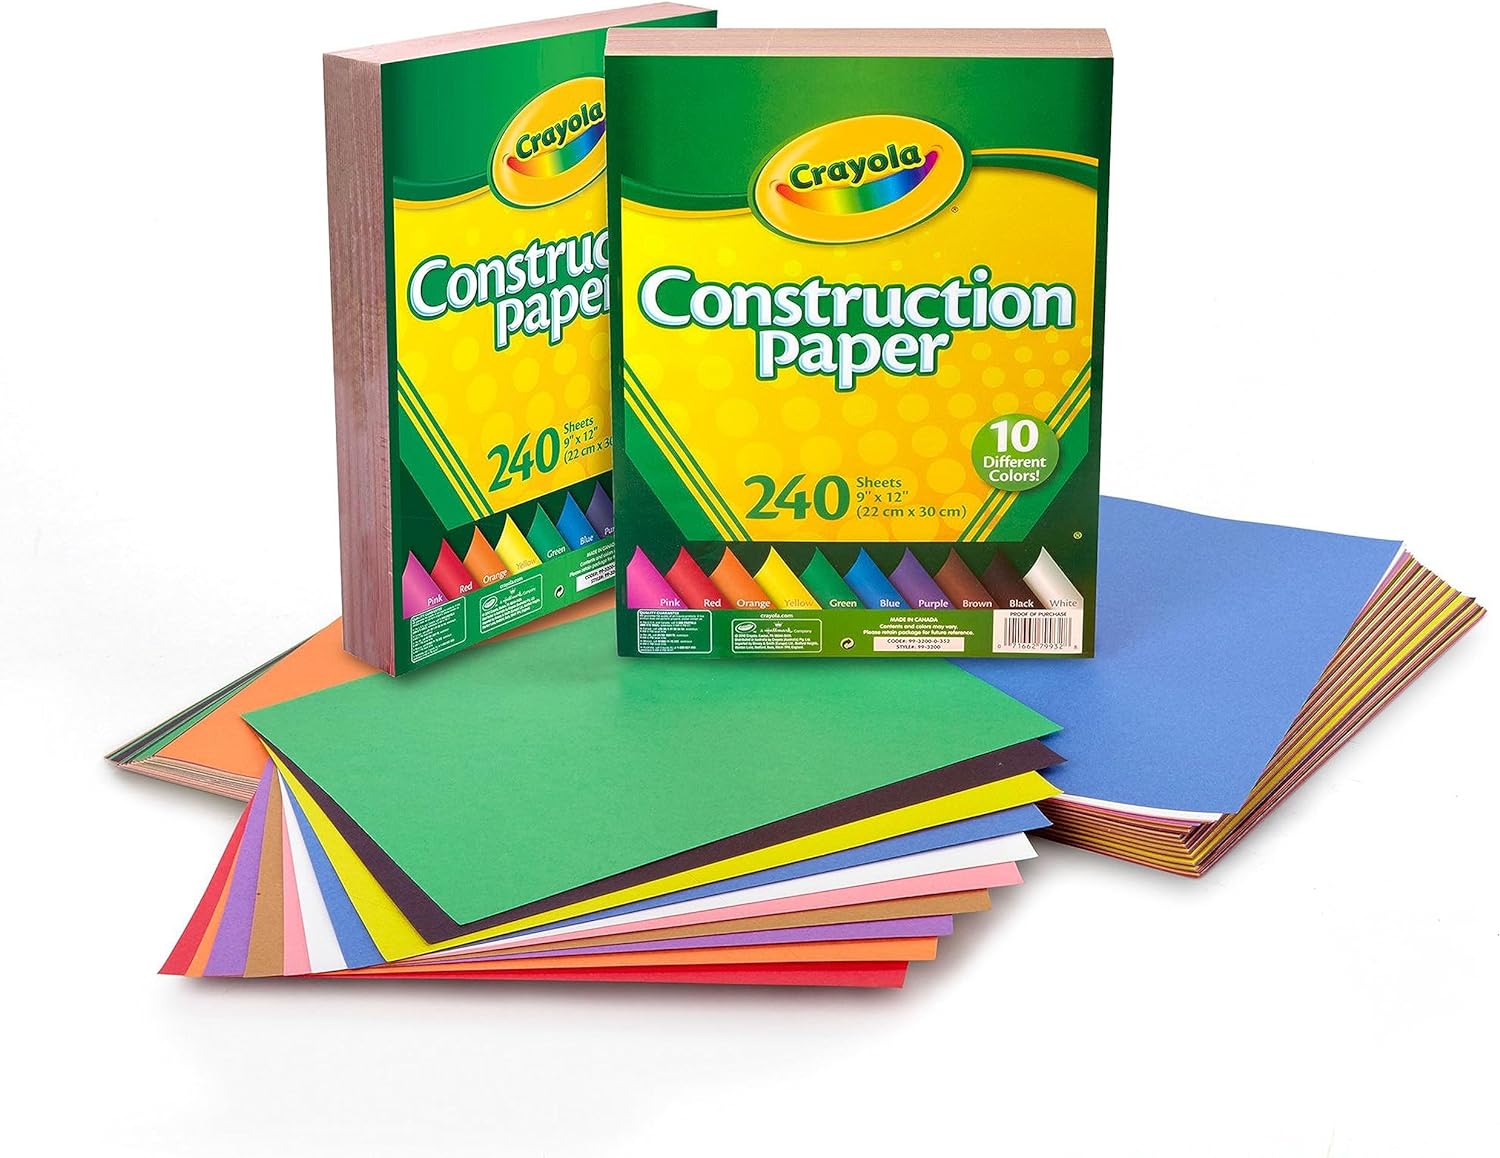 Crayola Construction Paper - 480ct (2 Pack), Bulk School Supplies for Kids, Classroom Supplies for Preschool, Elementary, Great for Arts & Crafts